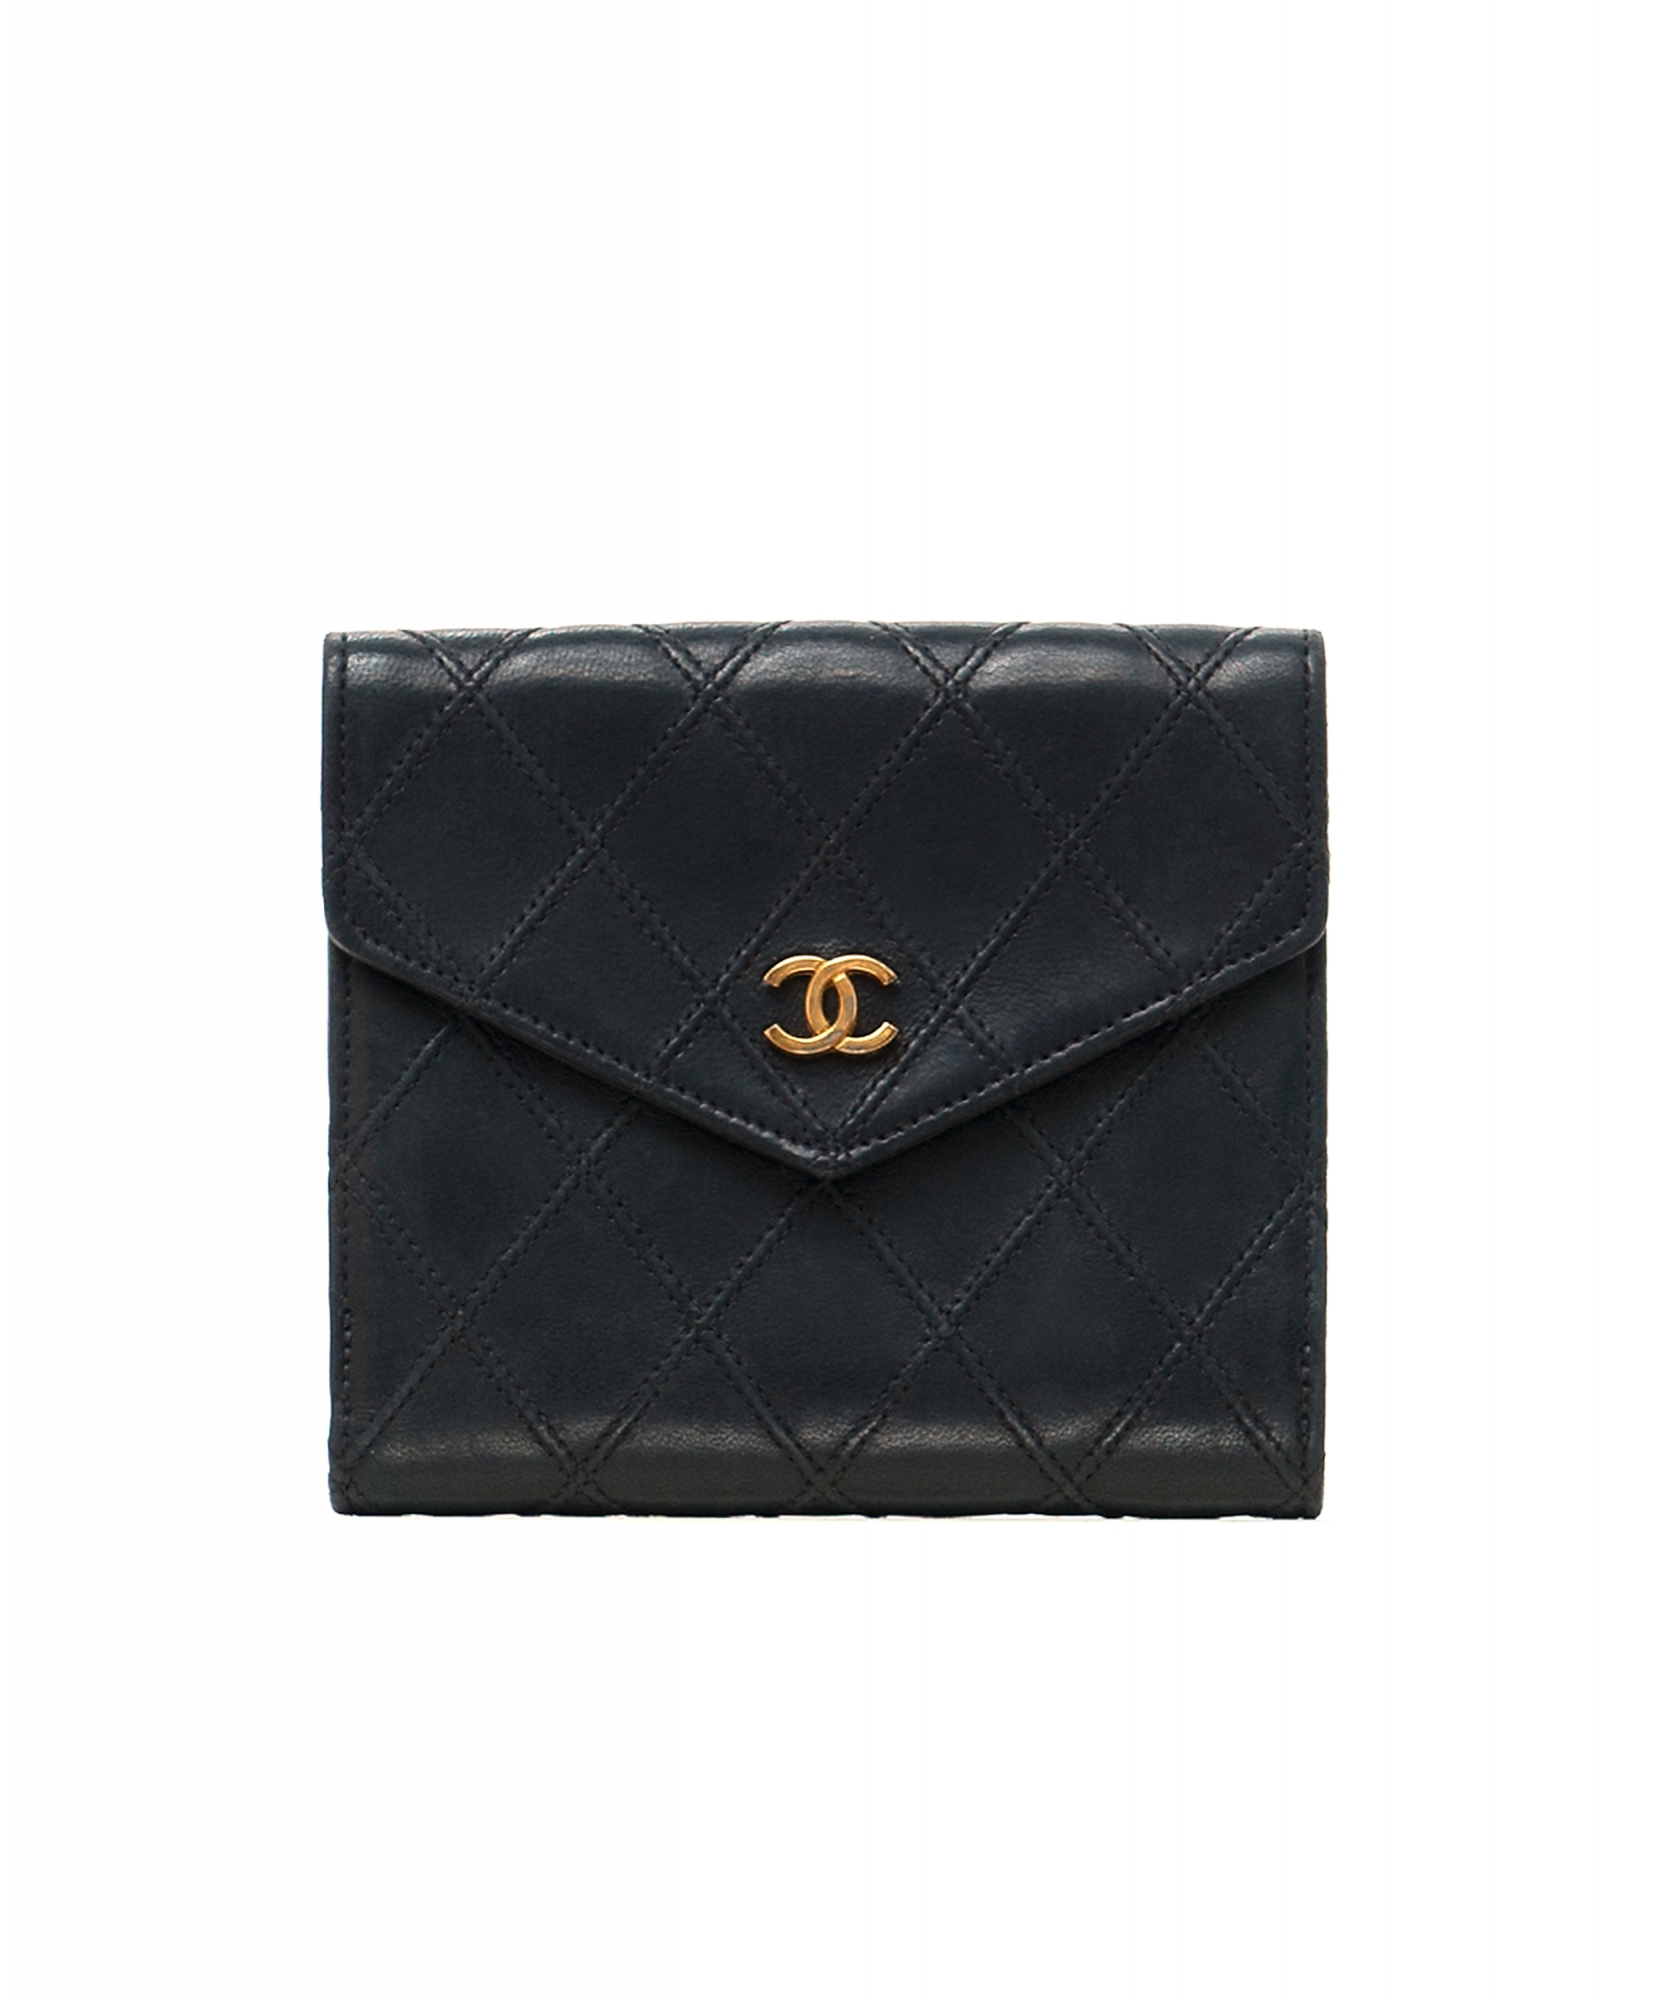 Chanel Black Leather Quilted Wallet - Chanel ArtListings